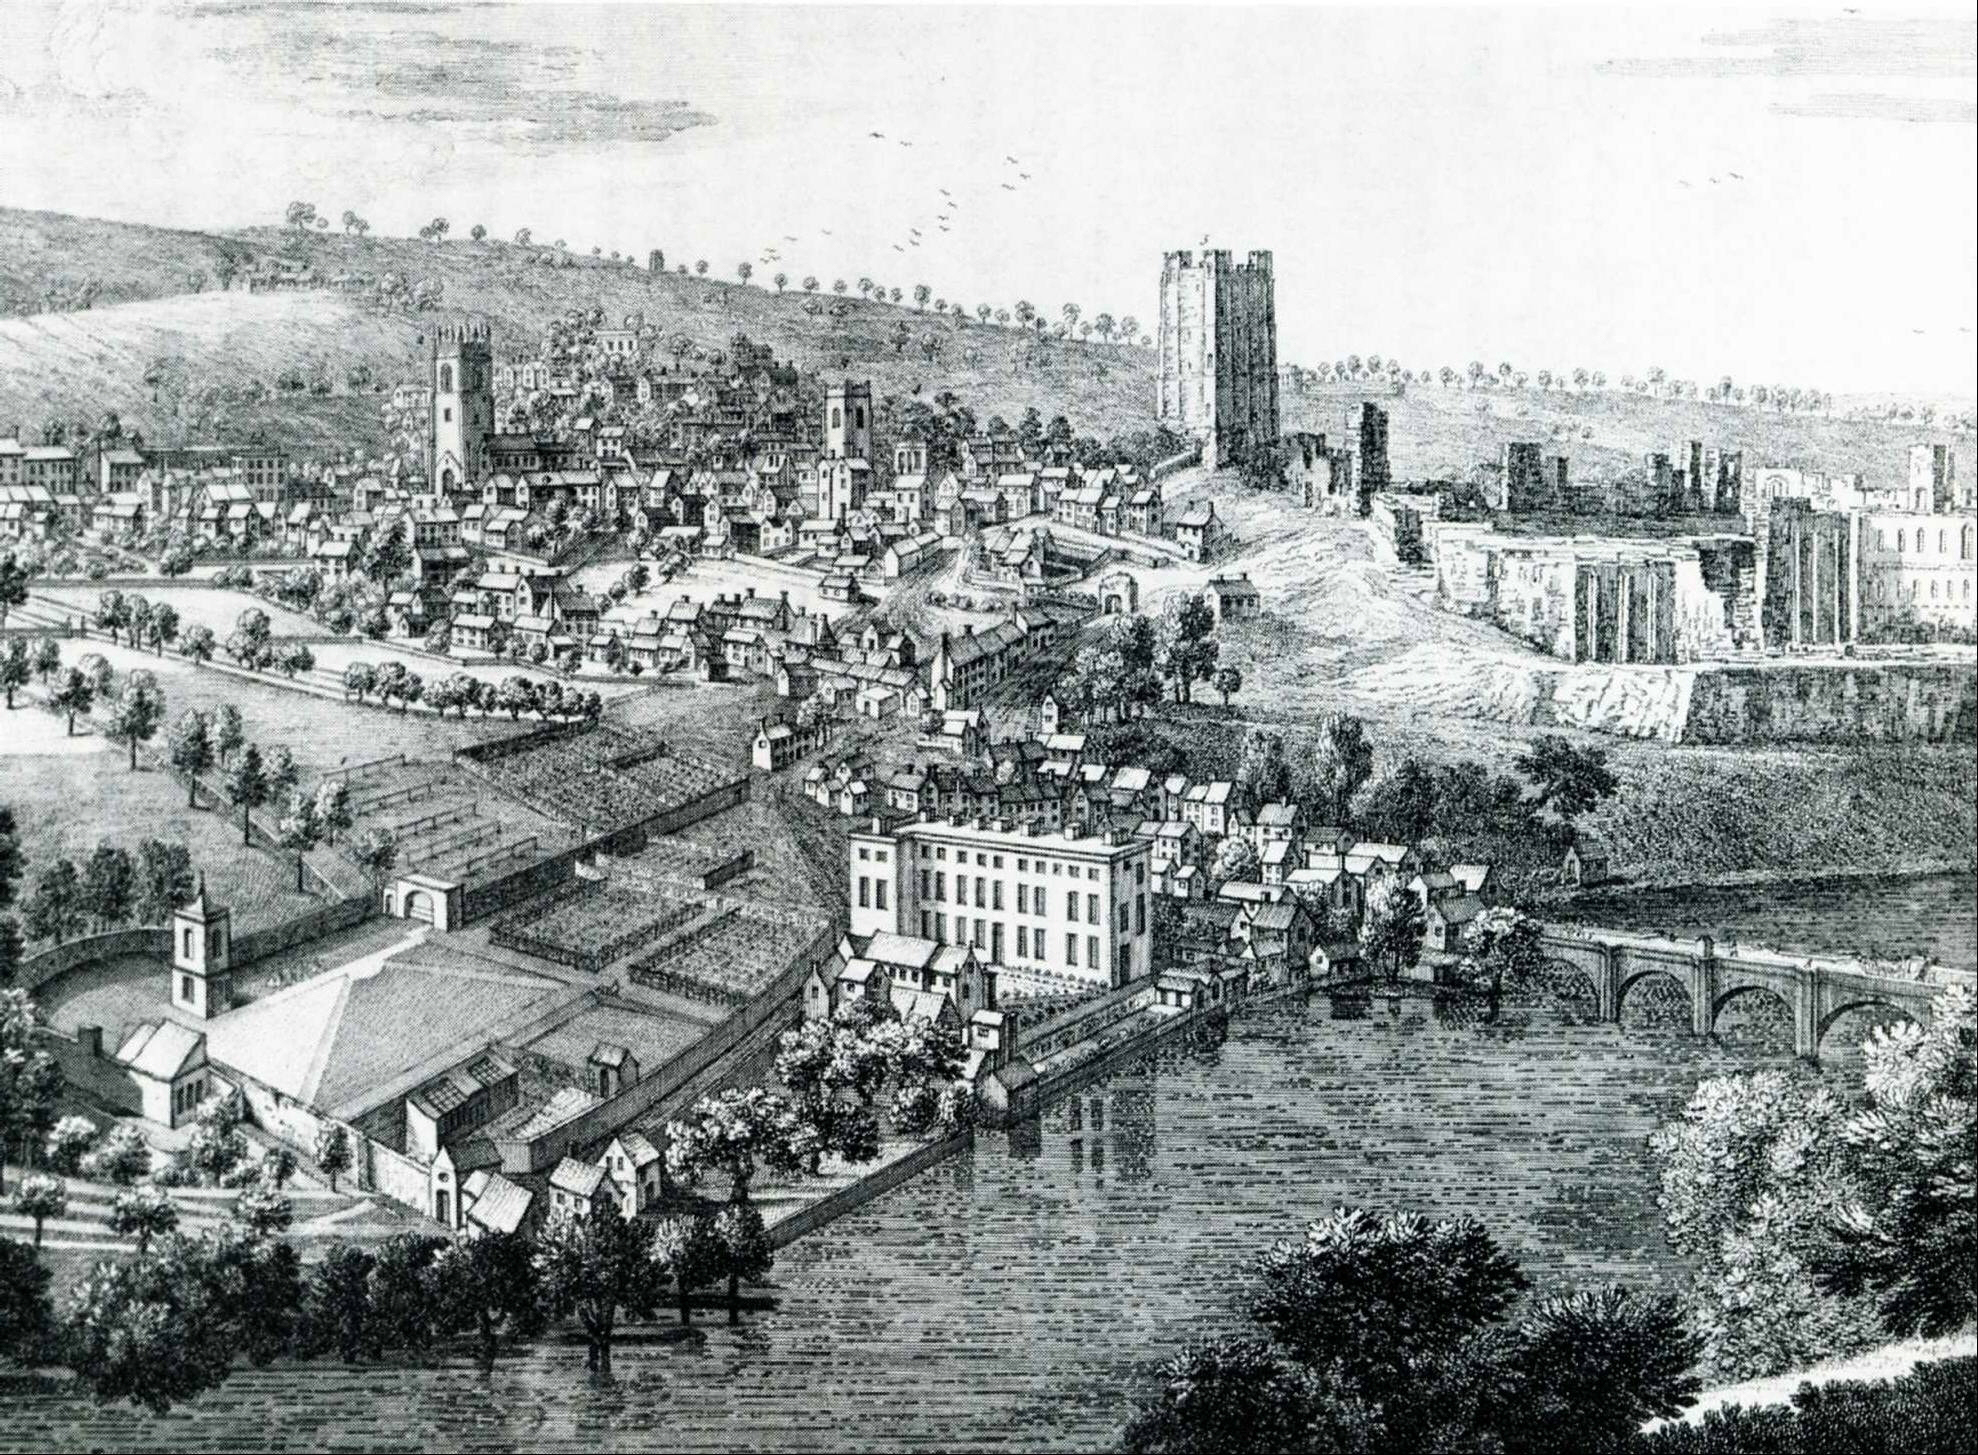 Richmond in 1749 with the castle dominating the background but the 15th Century Green Bridge, with four arches, at the bottom right. It was washed away in 1771